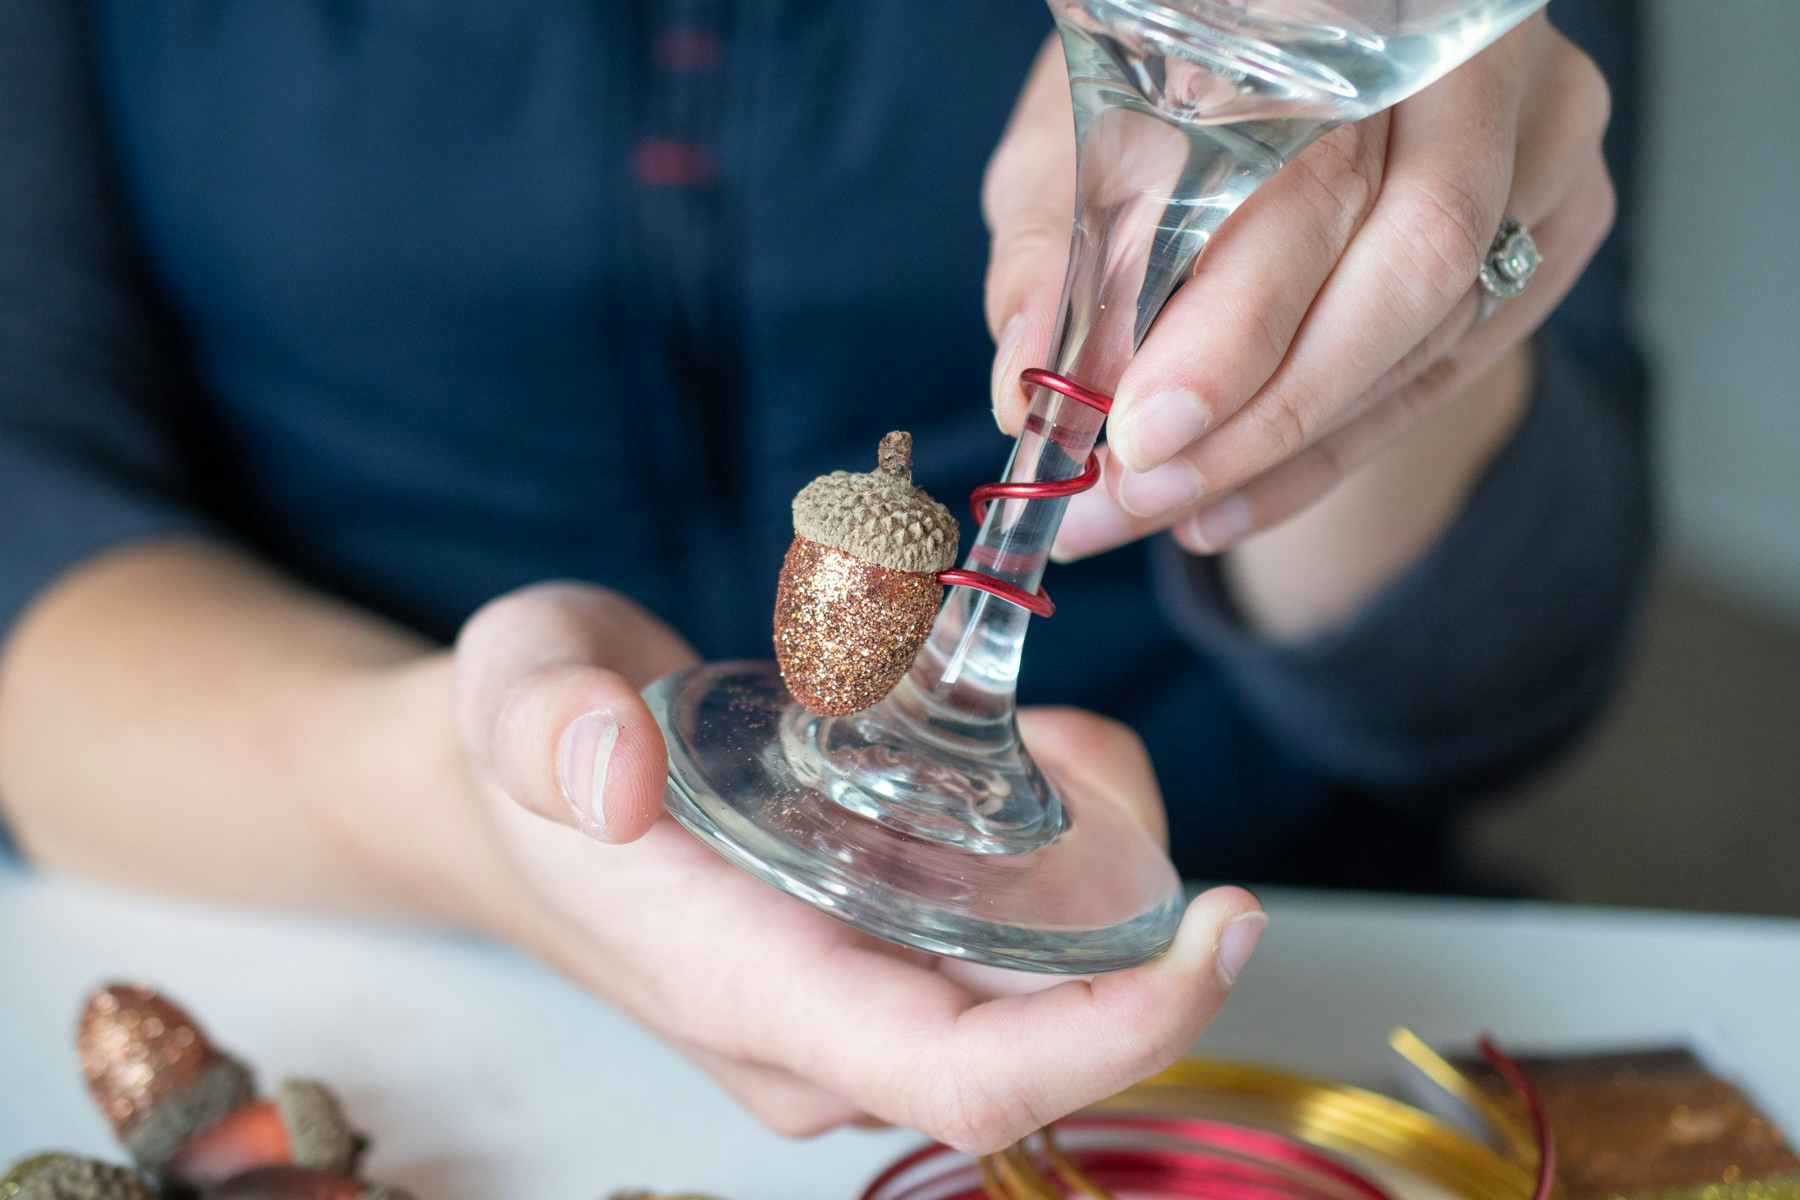 A wine glass with a homemade acorn charm on the bottom.